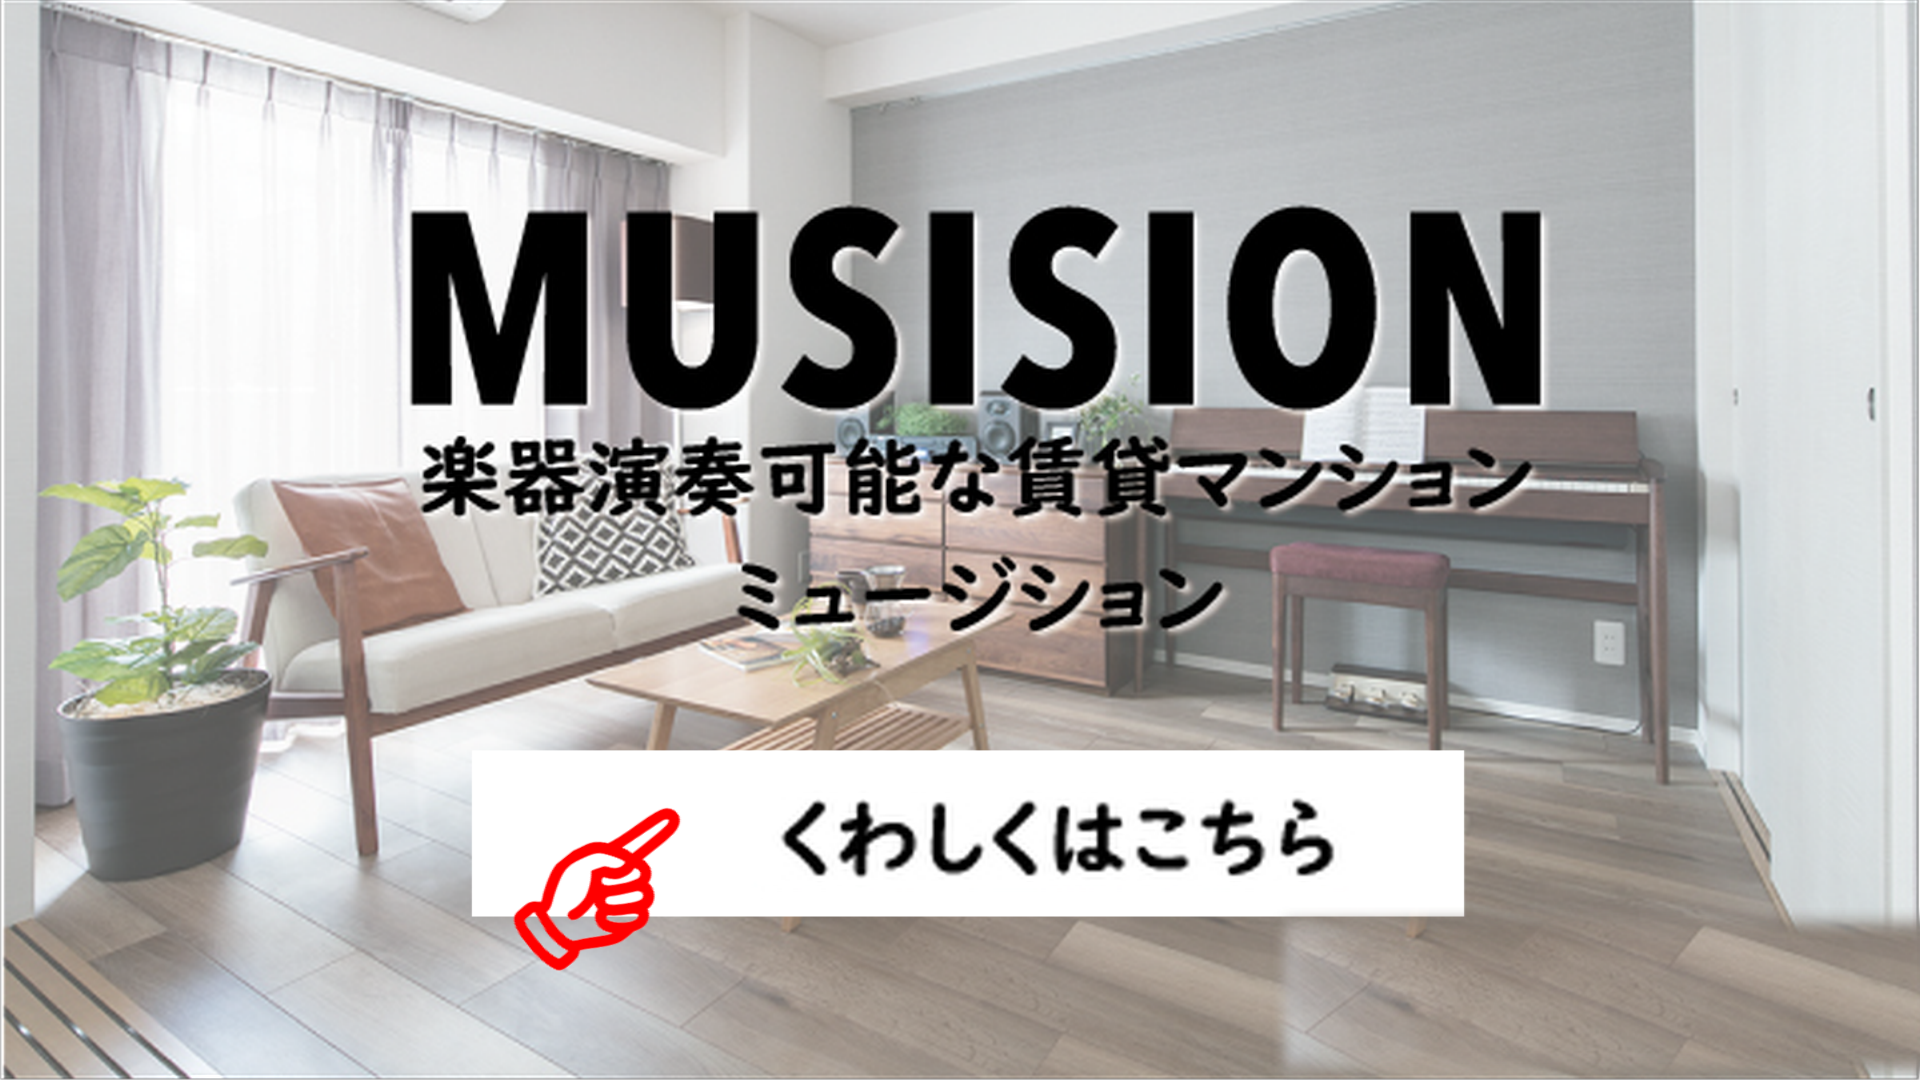 MUSISION